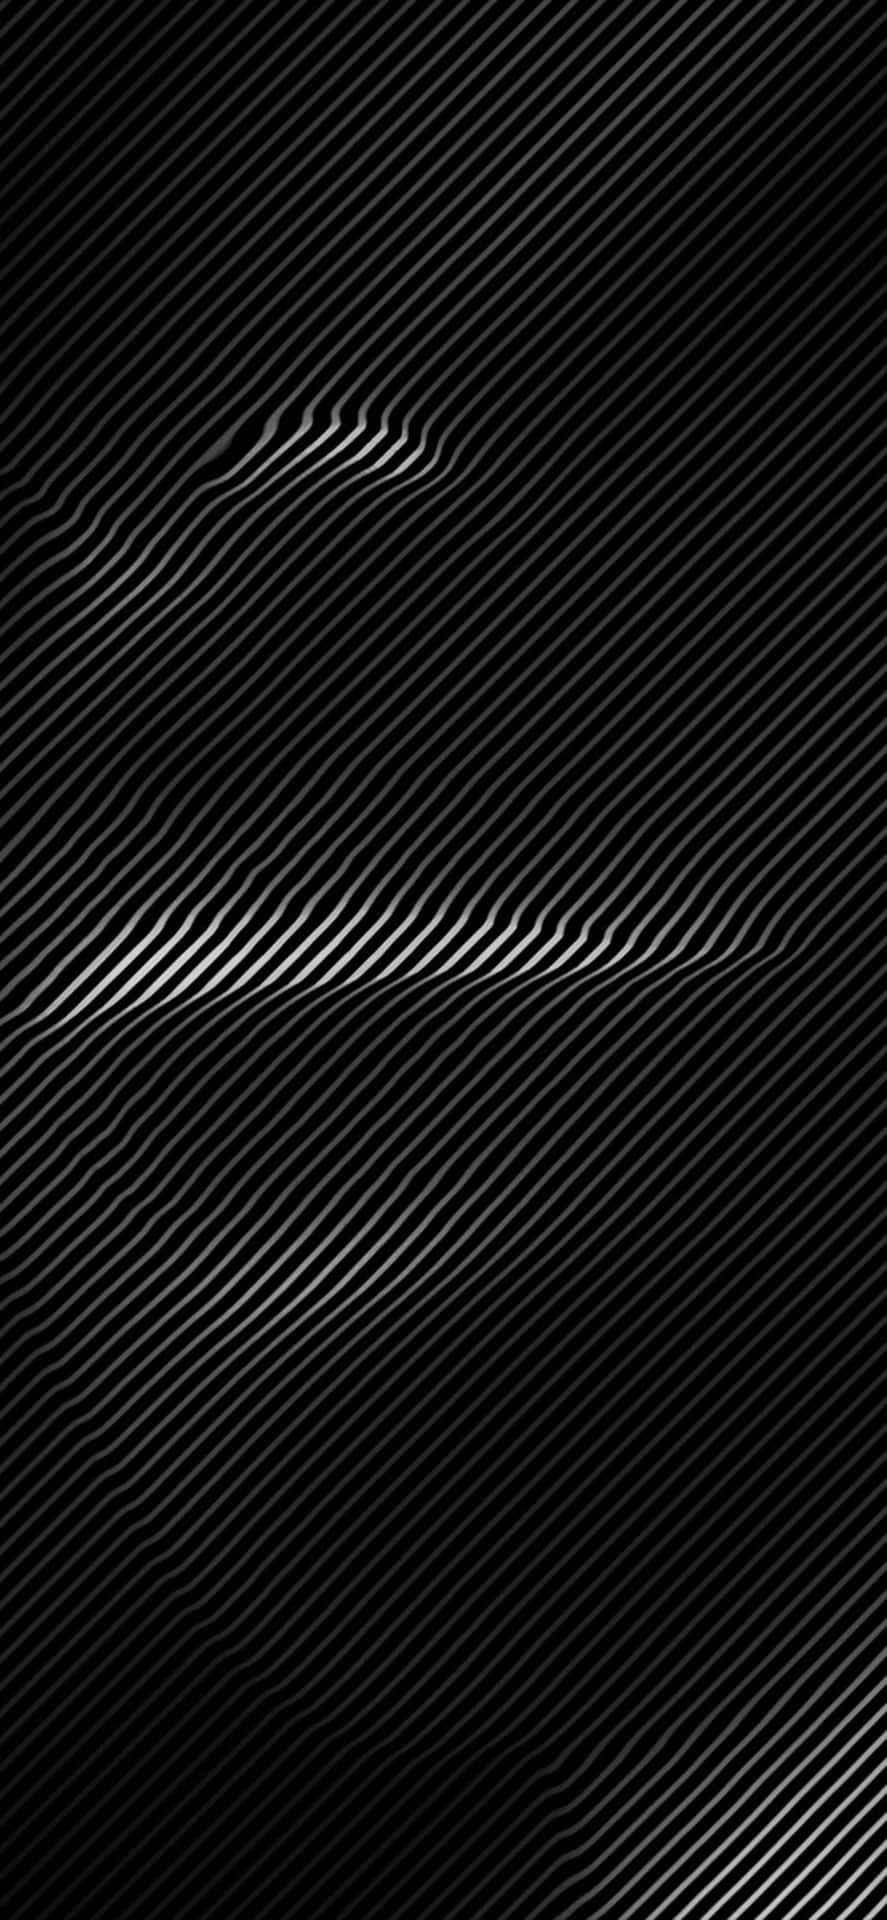 Black And White Abstract Background With Lines